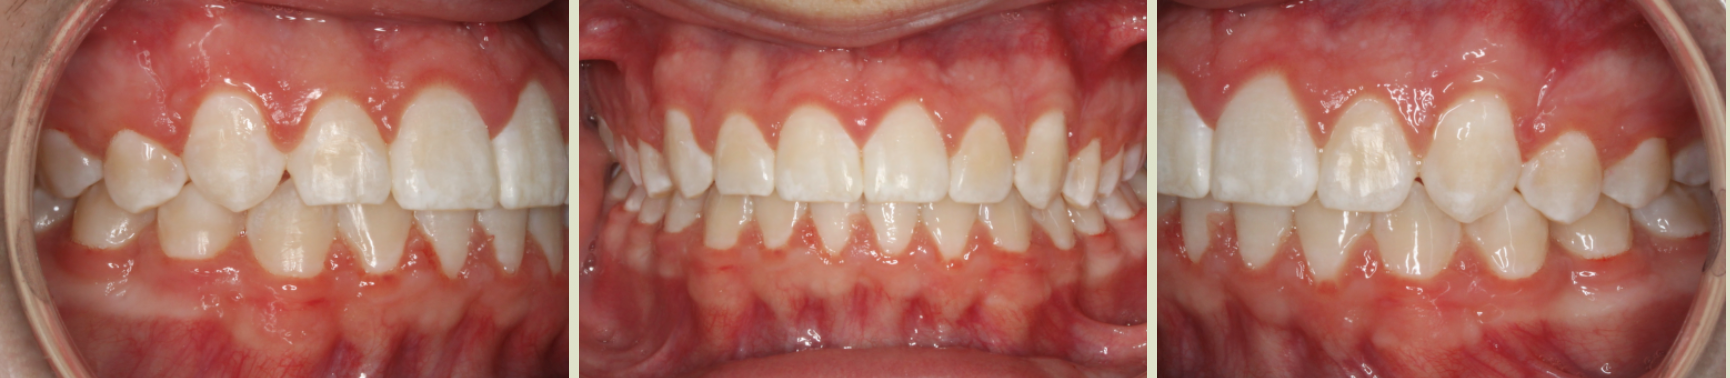 After photo (front view of teeth): Severe Dental Crowding - Palate Expander & Braces, Case Study #5